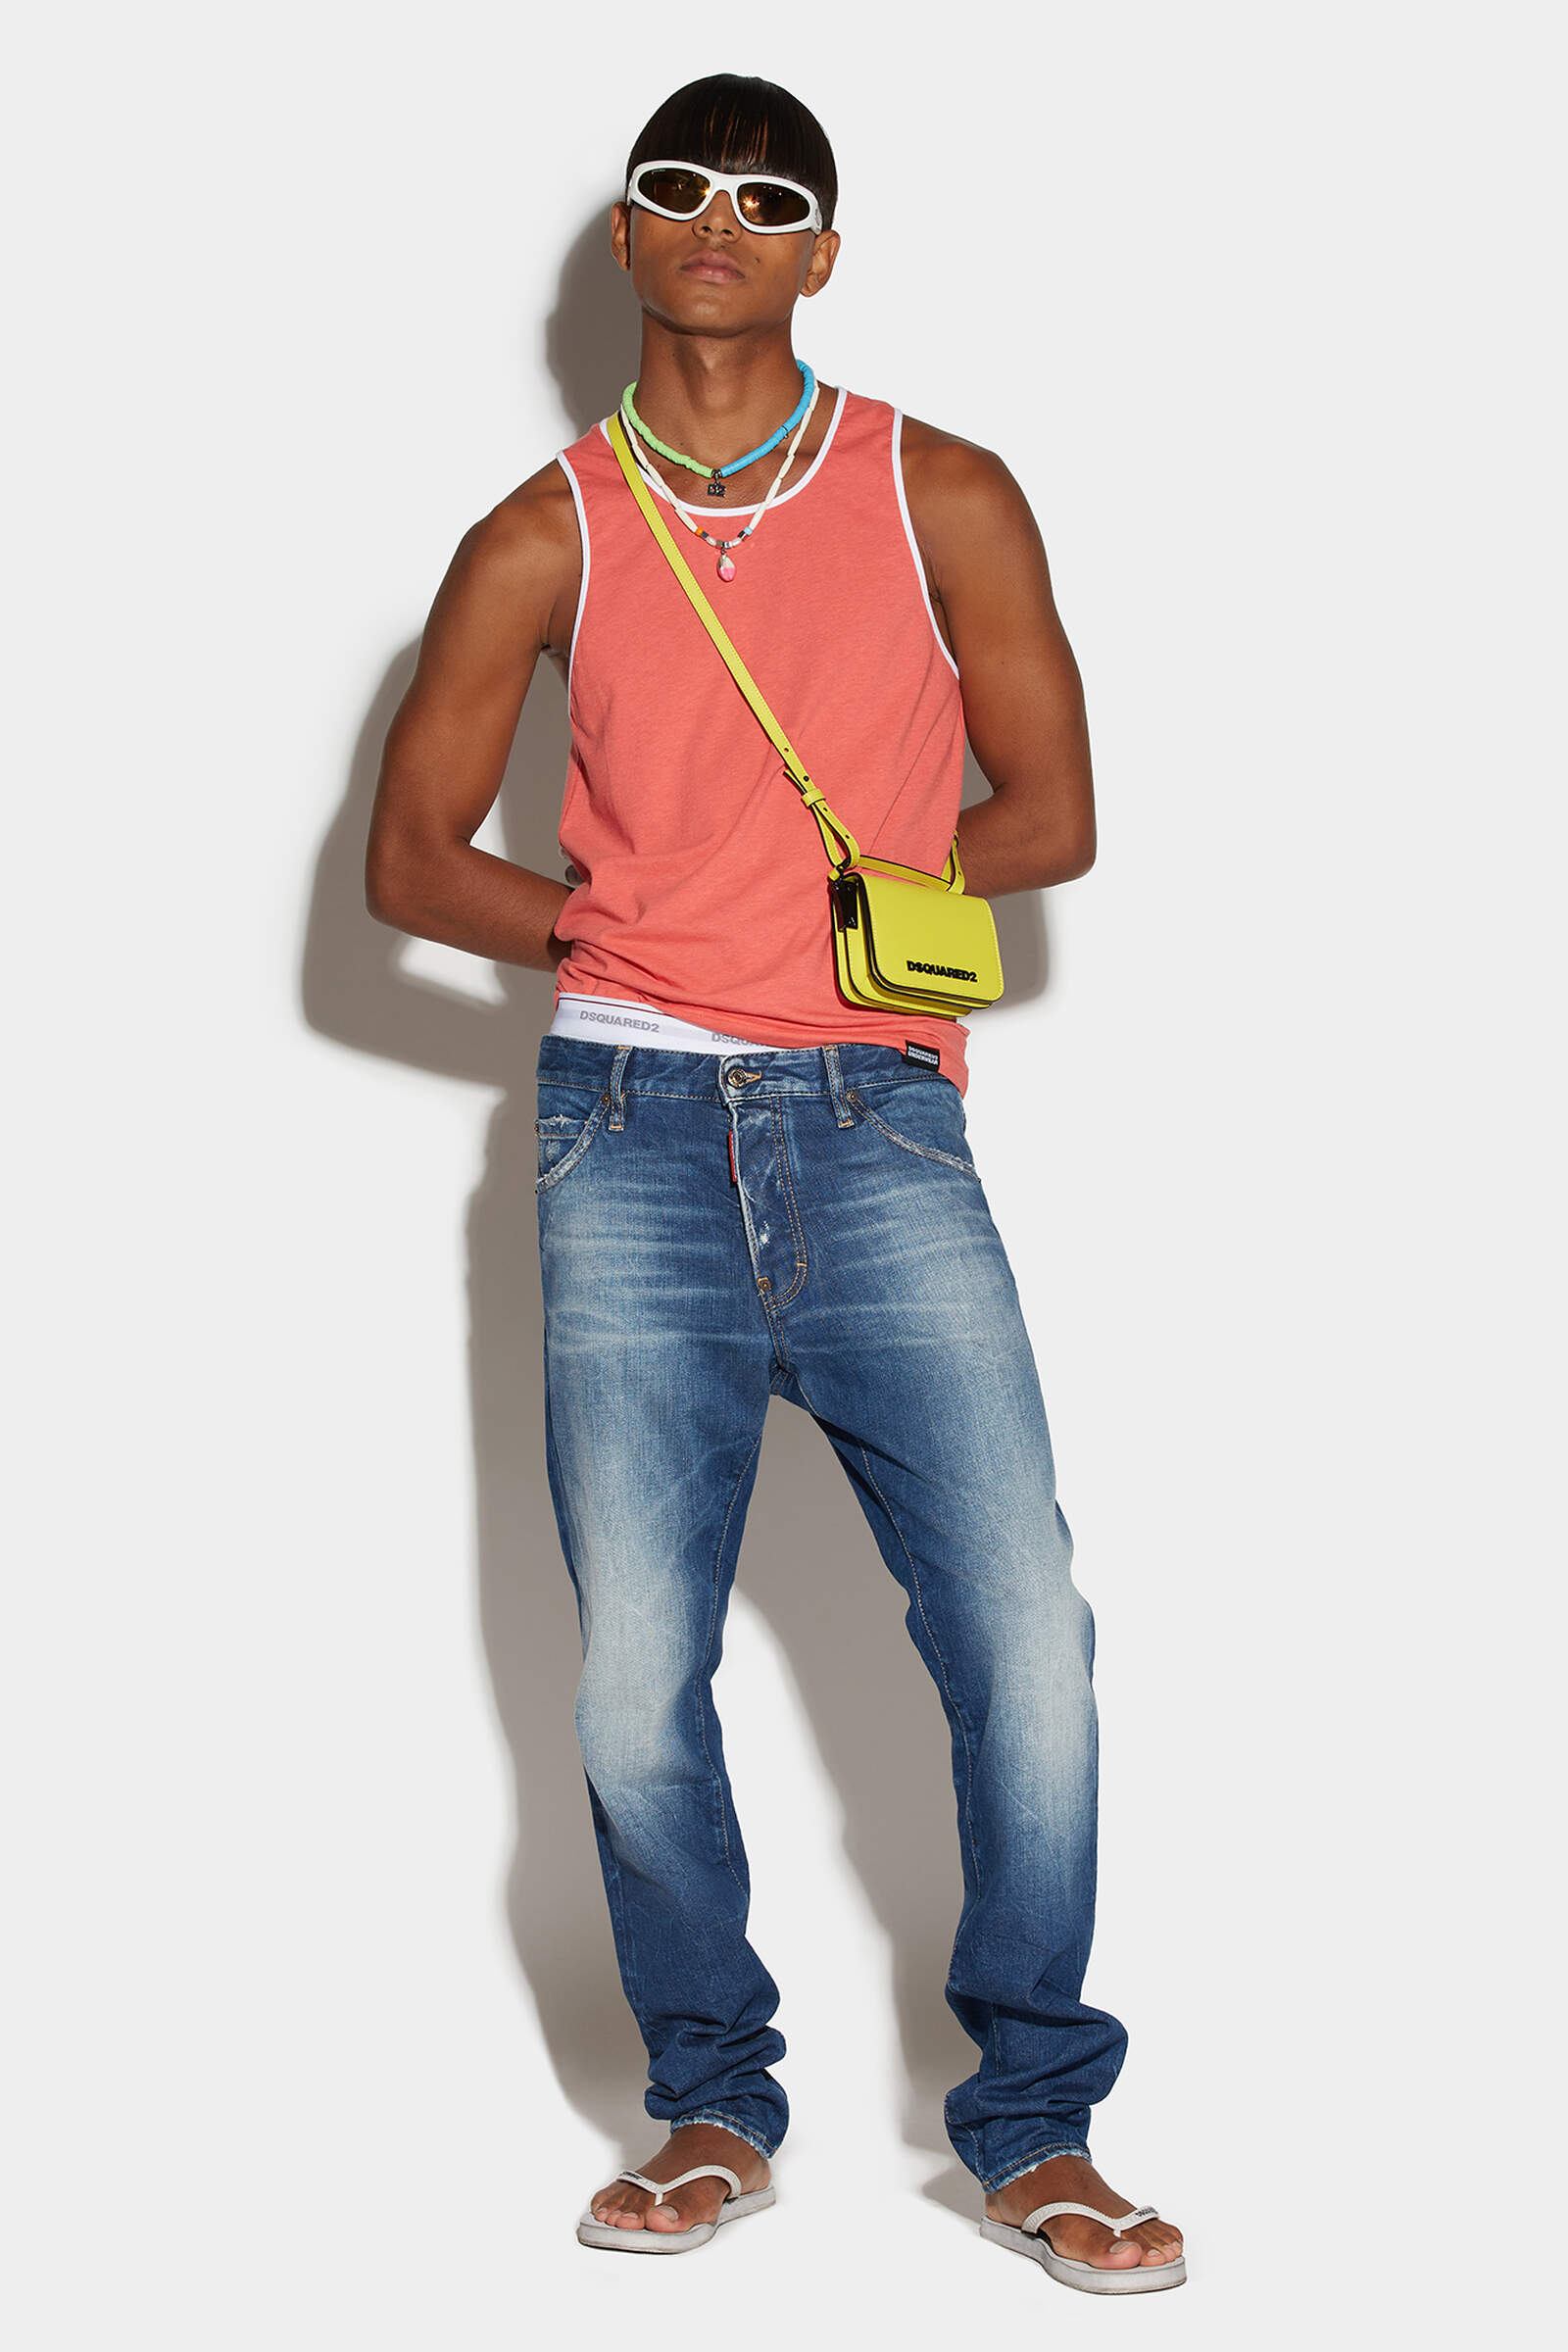 DSQUARED2 Jeans Cool Guy in Washed Blue 48